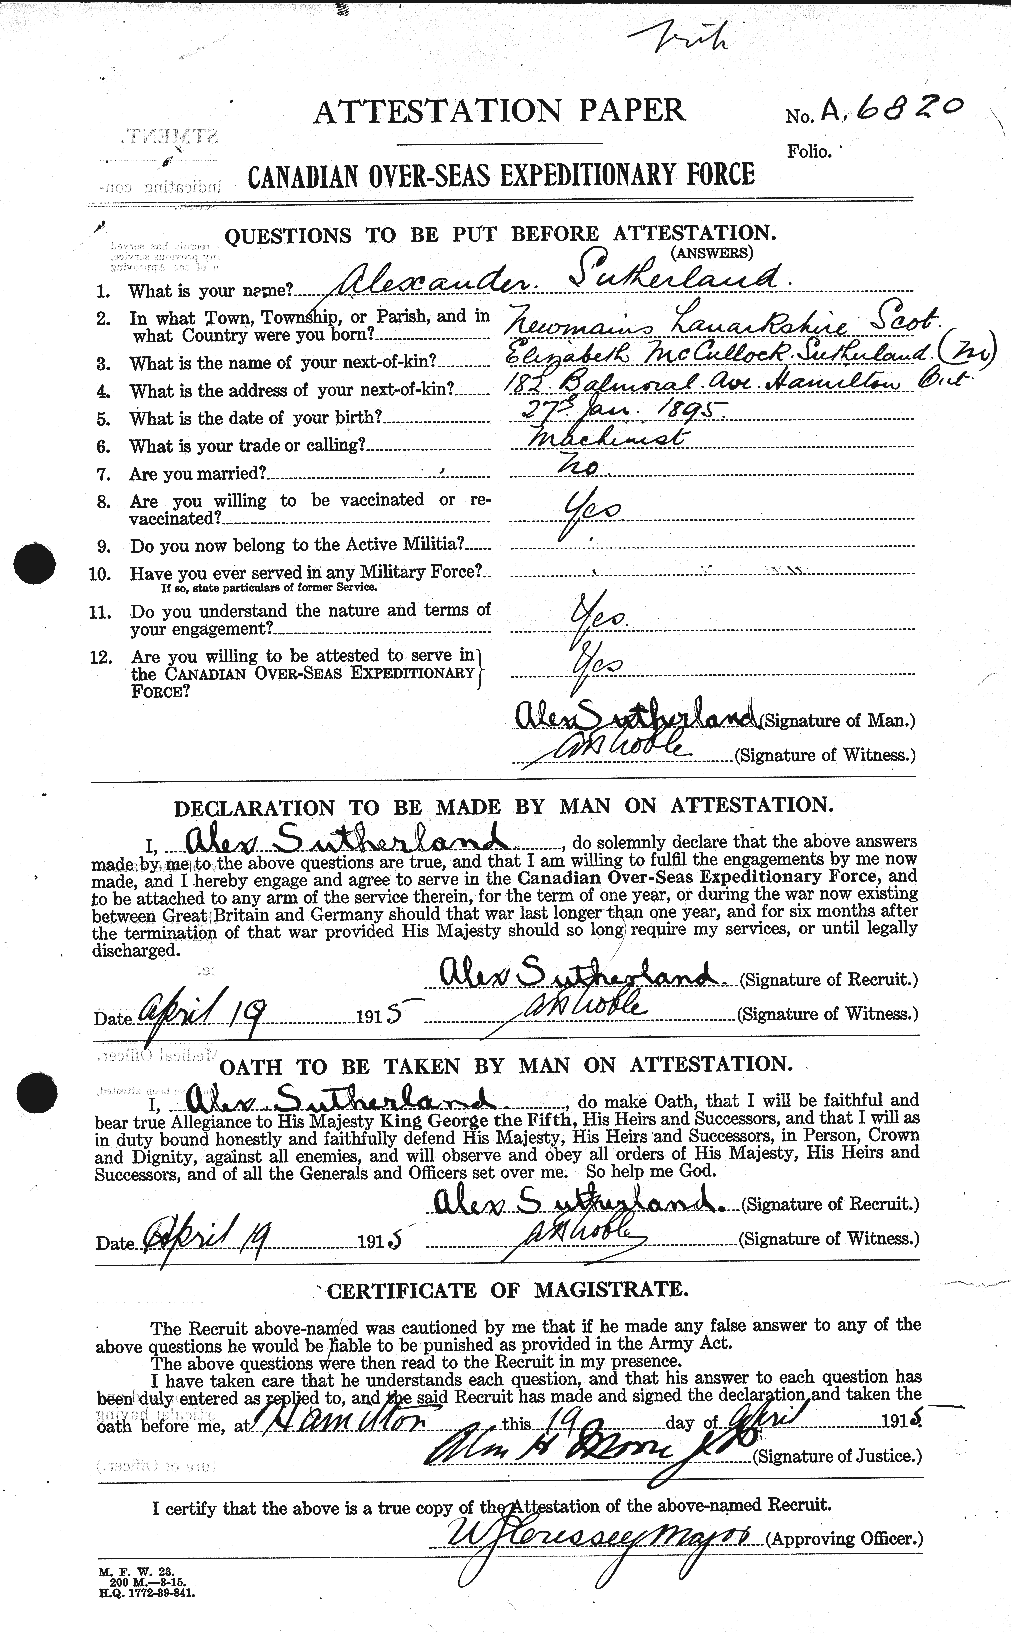 Personnel Records of the First World War - CEF 125355a